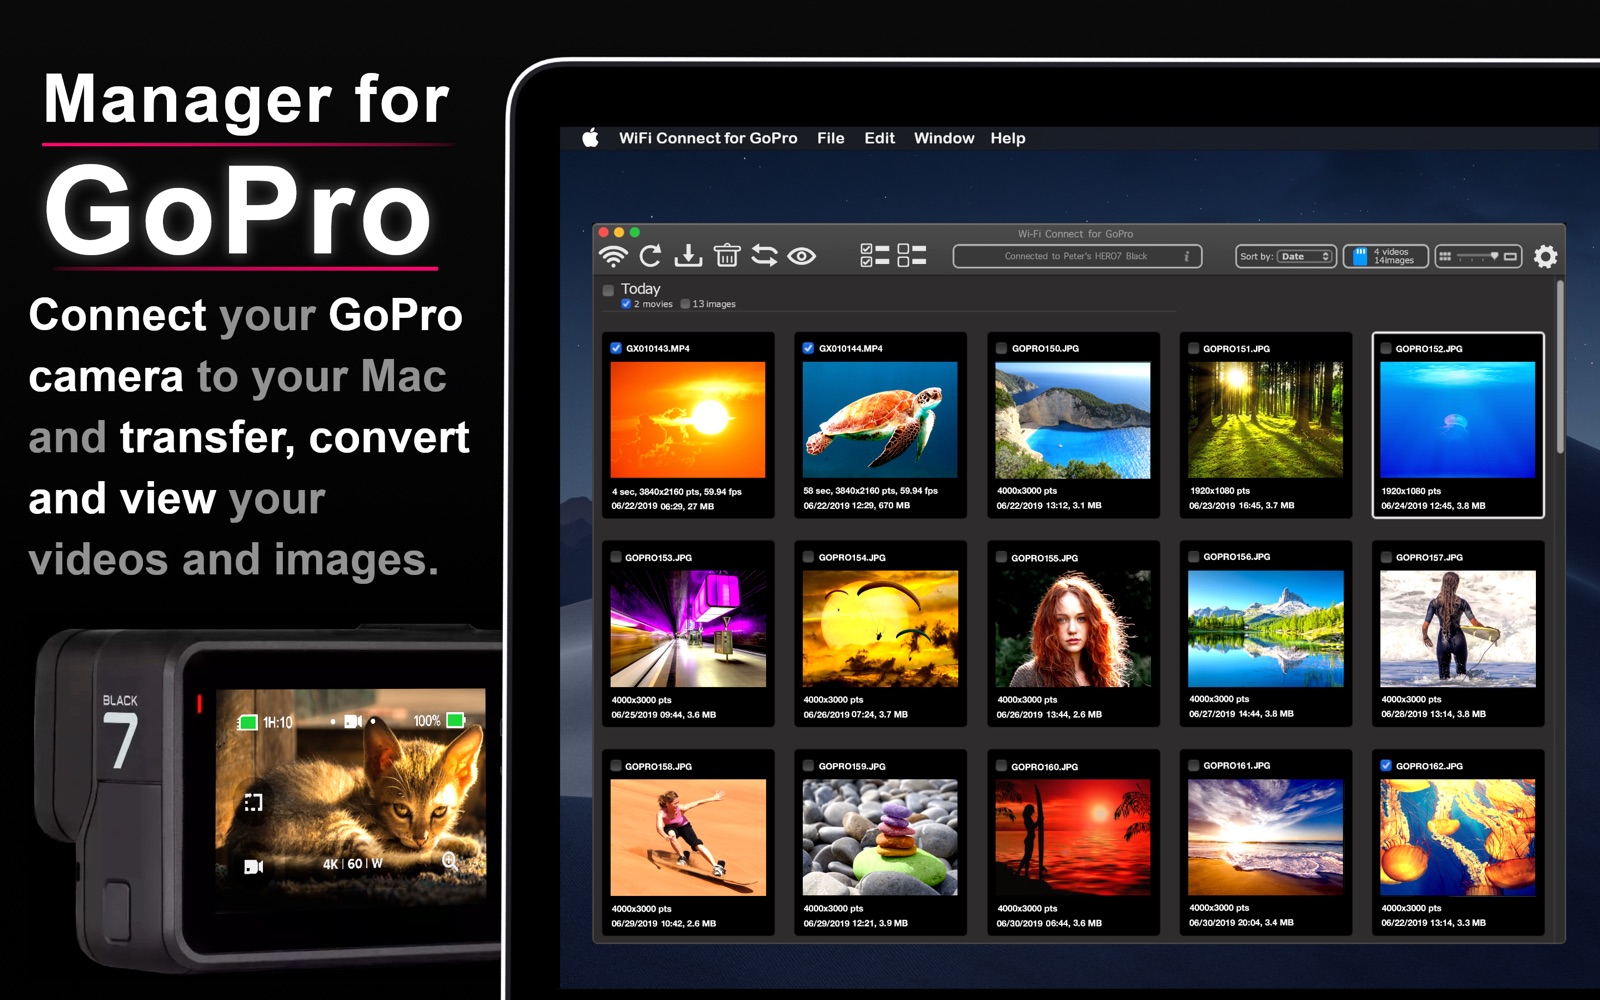 WiFi Connect for GoPro 2.1 : Main Window